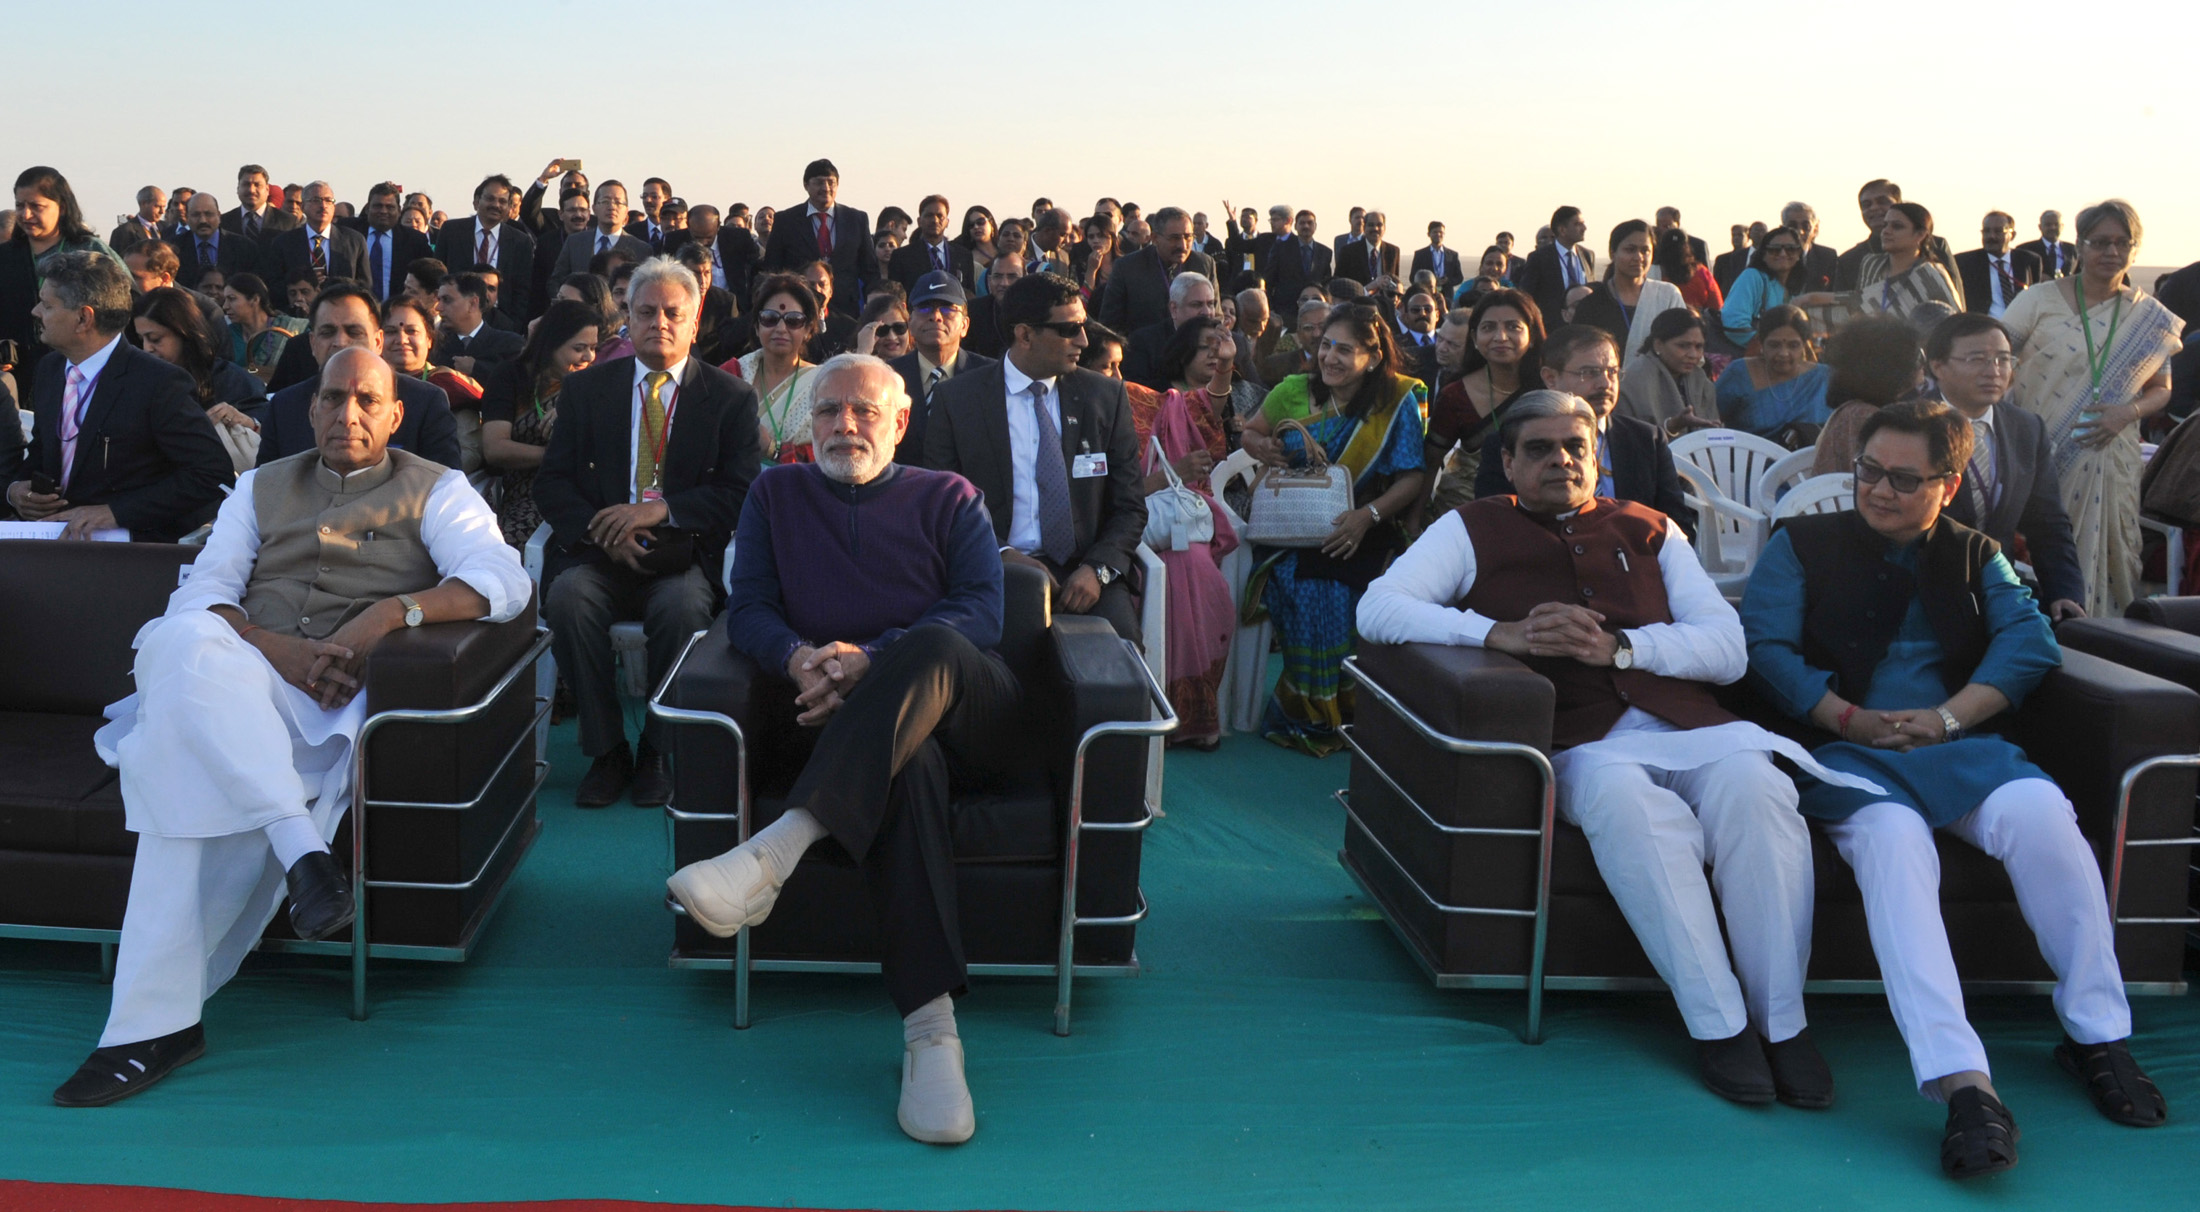 The Prime Minister, Shri Narendra Modi witnessing the camel show and cultural performance, on the sidelines of the DGP conference, at White Rann, Dhordo, Gujarat on December 18, 2015. 	The Union Home Minister, Shri Rajnath Singh, the Minister of State for Home Affairs, Shri Kiren Rijiju and the Minister of State for Home Affairs, Shri Haribhai Parthibhai Chaudhary are also seen.